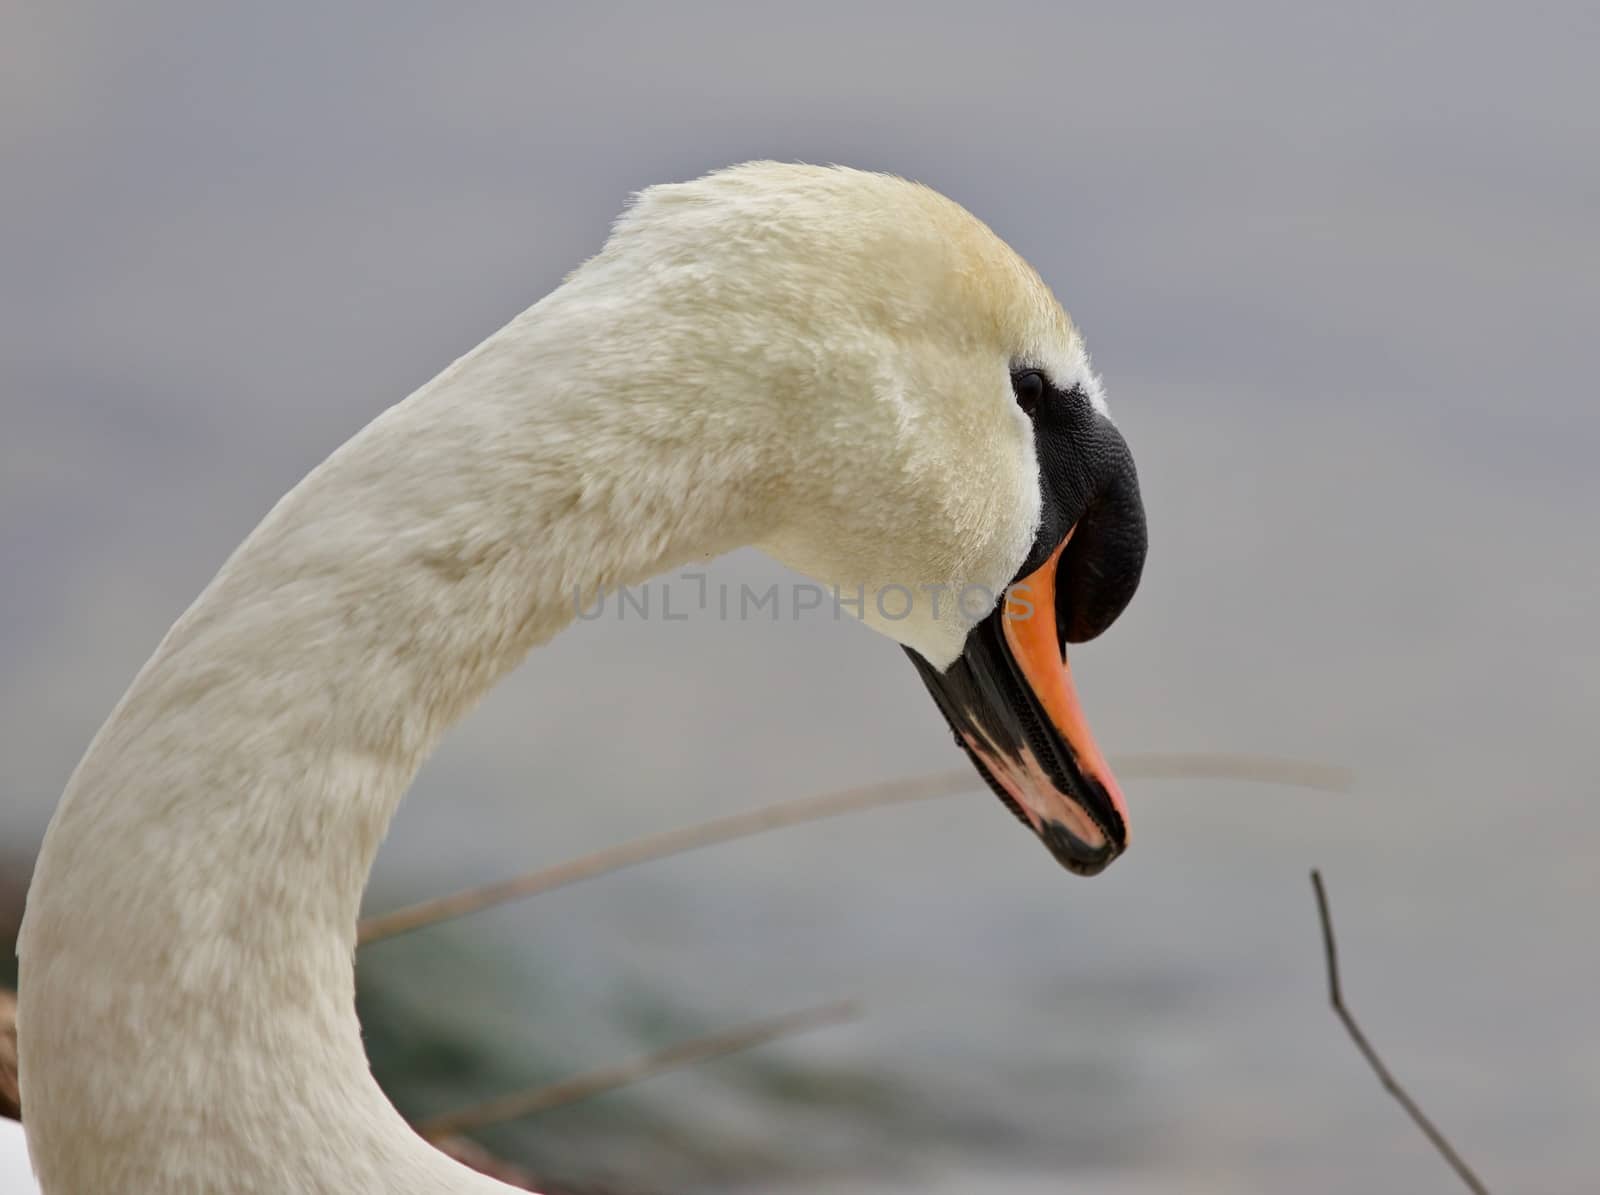 Beautiful portrait of a strong mute swan by teo